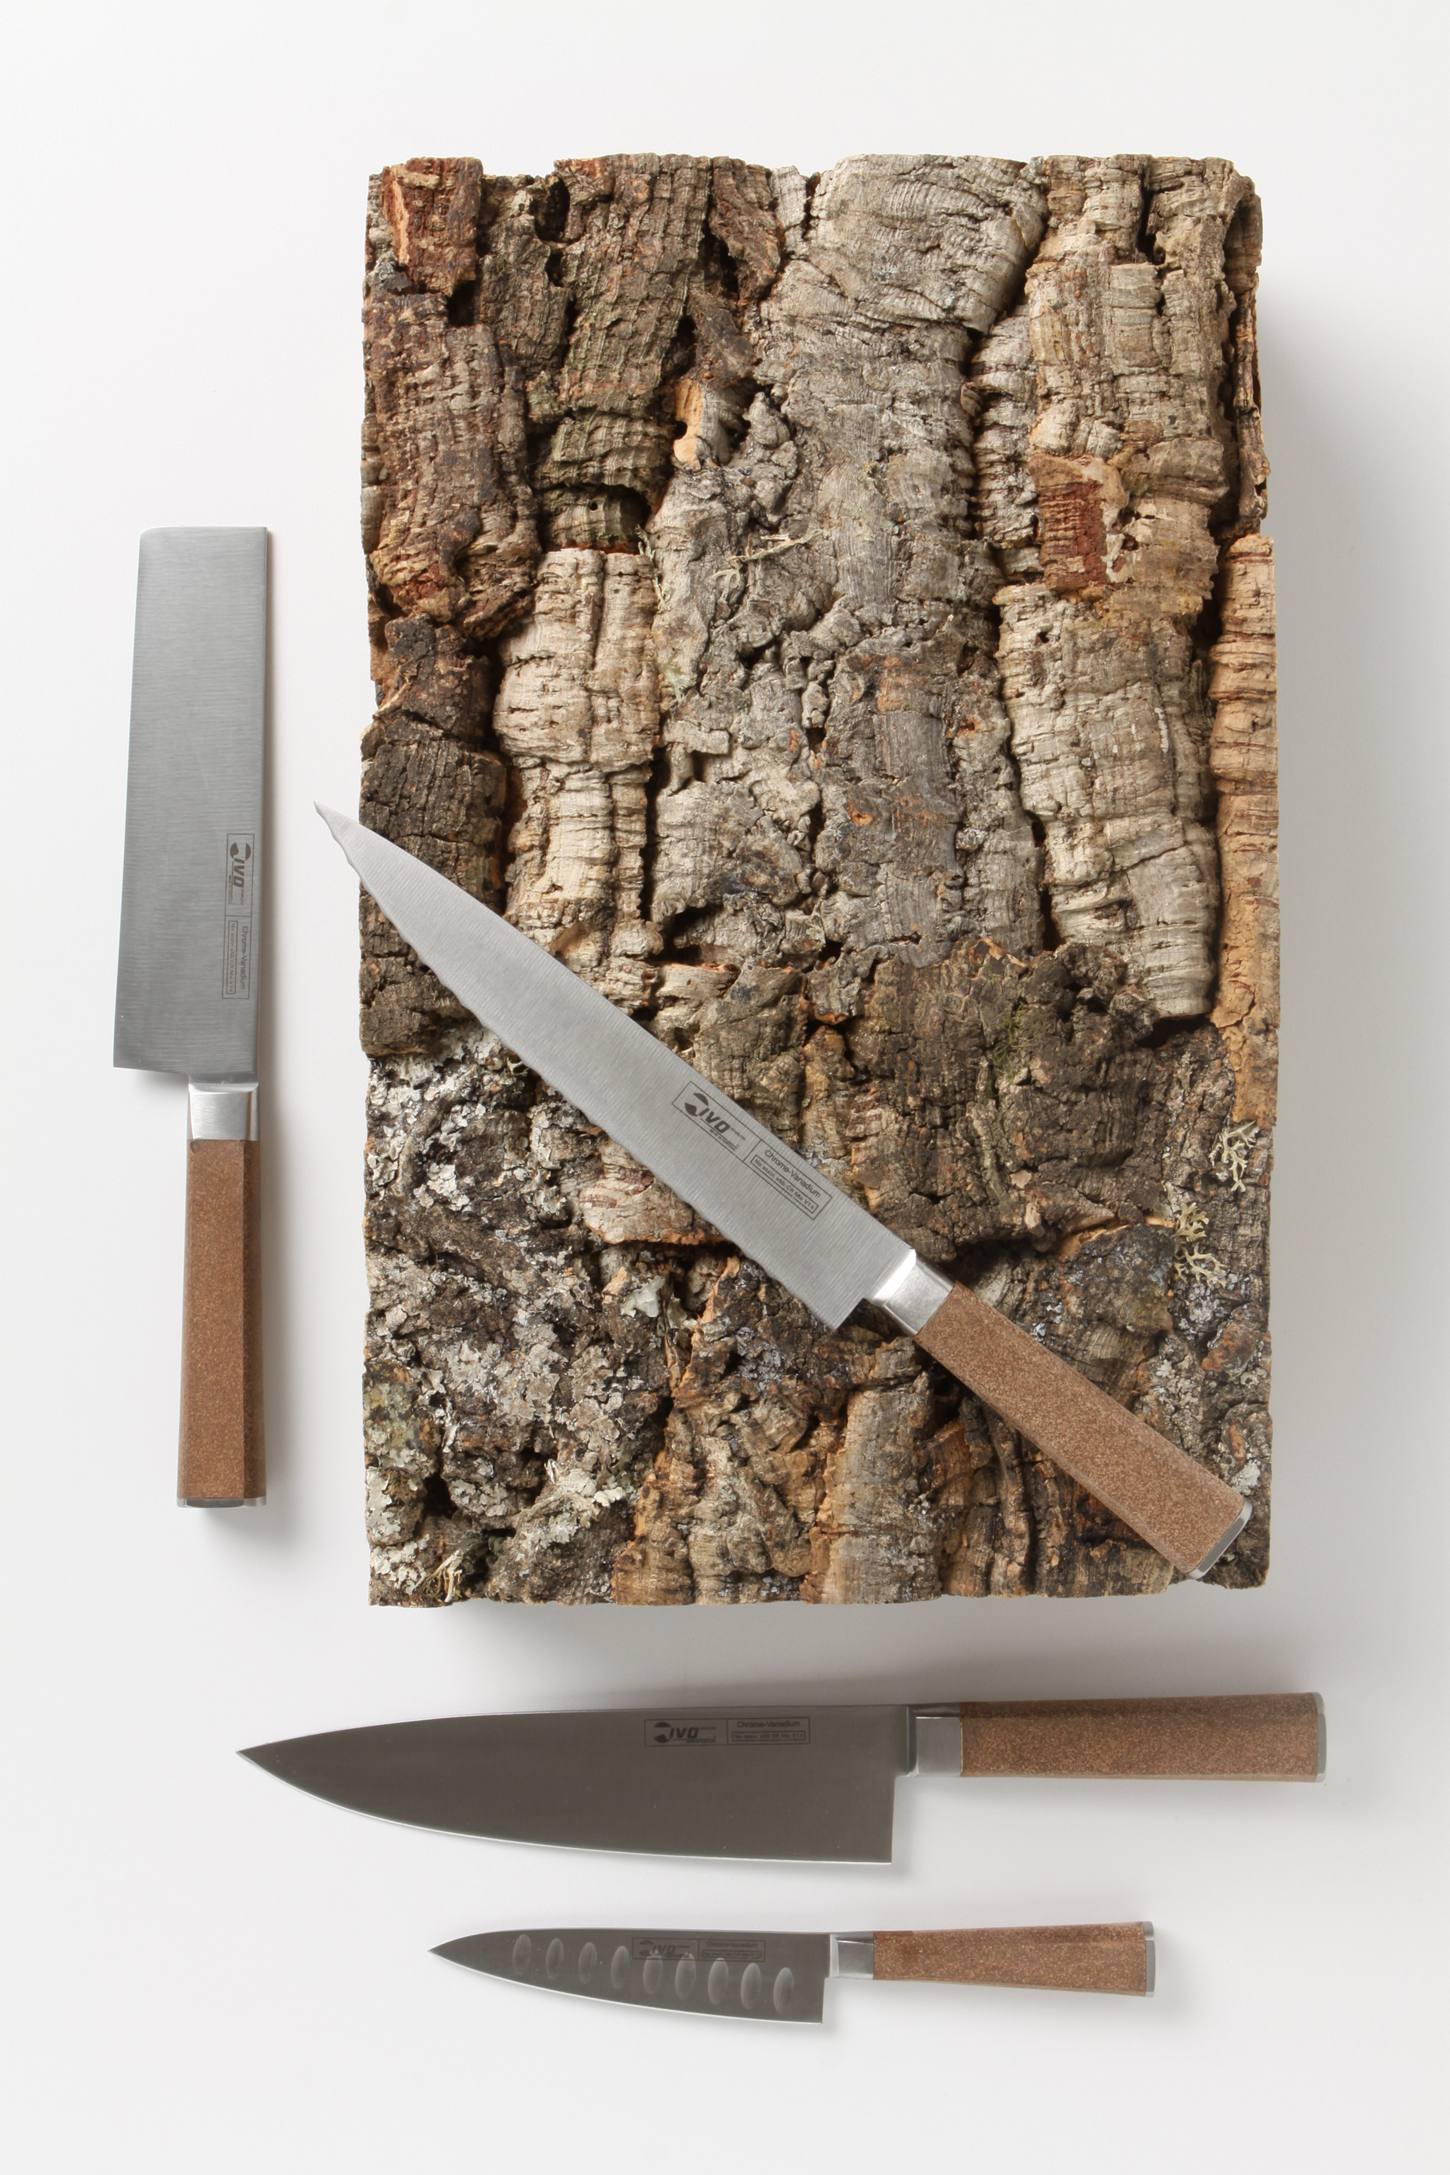 Cork knife set with piece of cork to hold knives